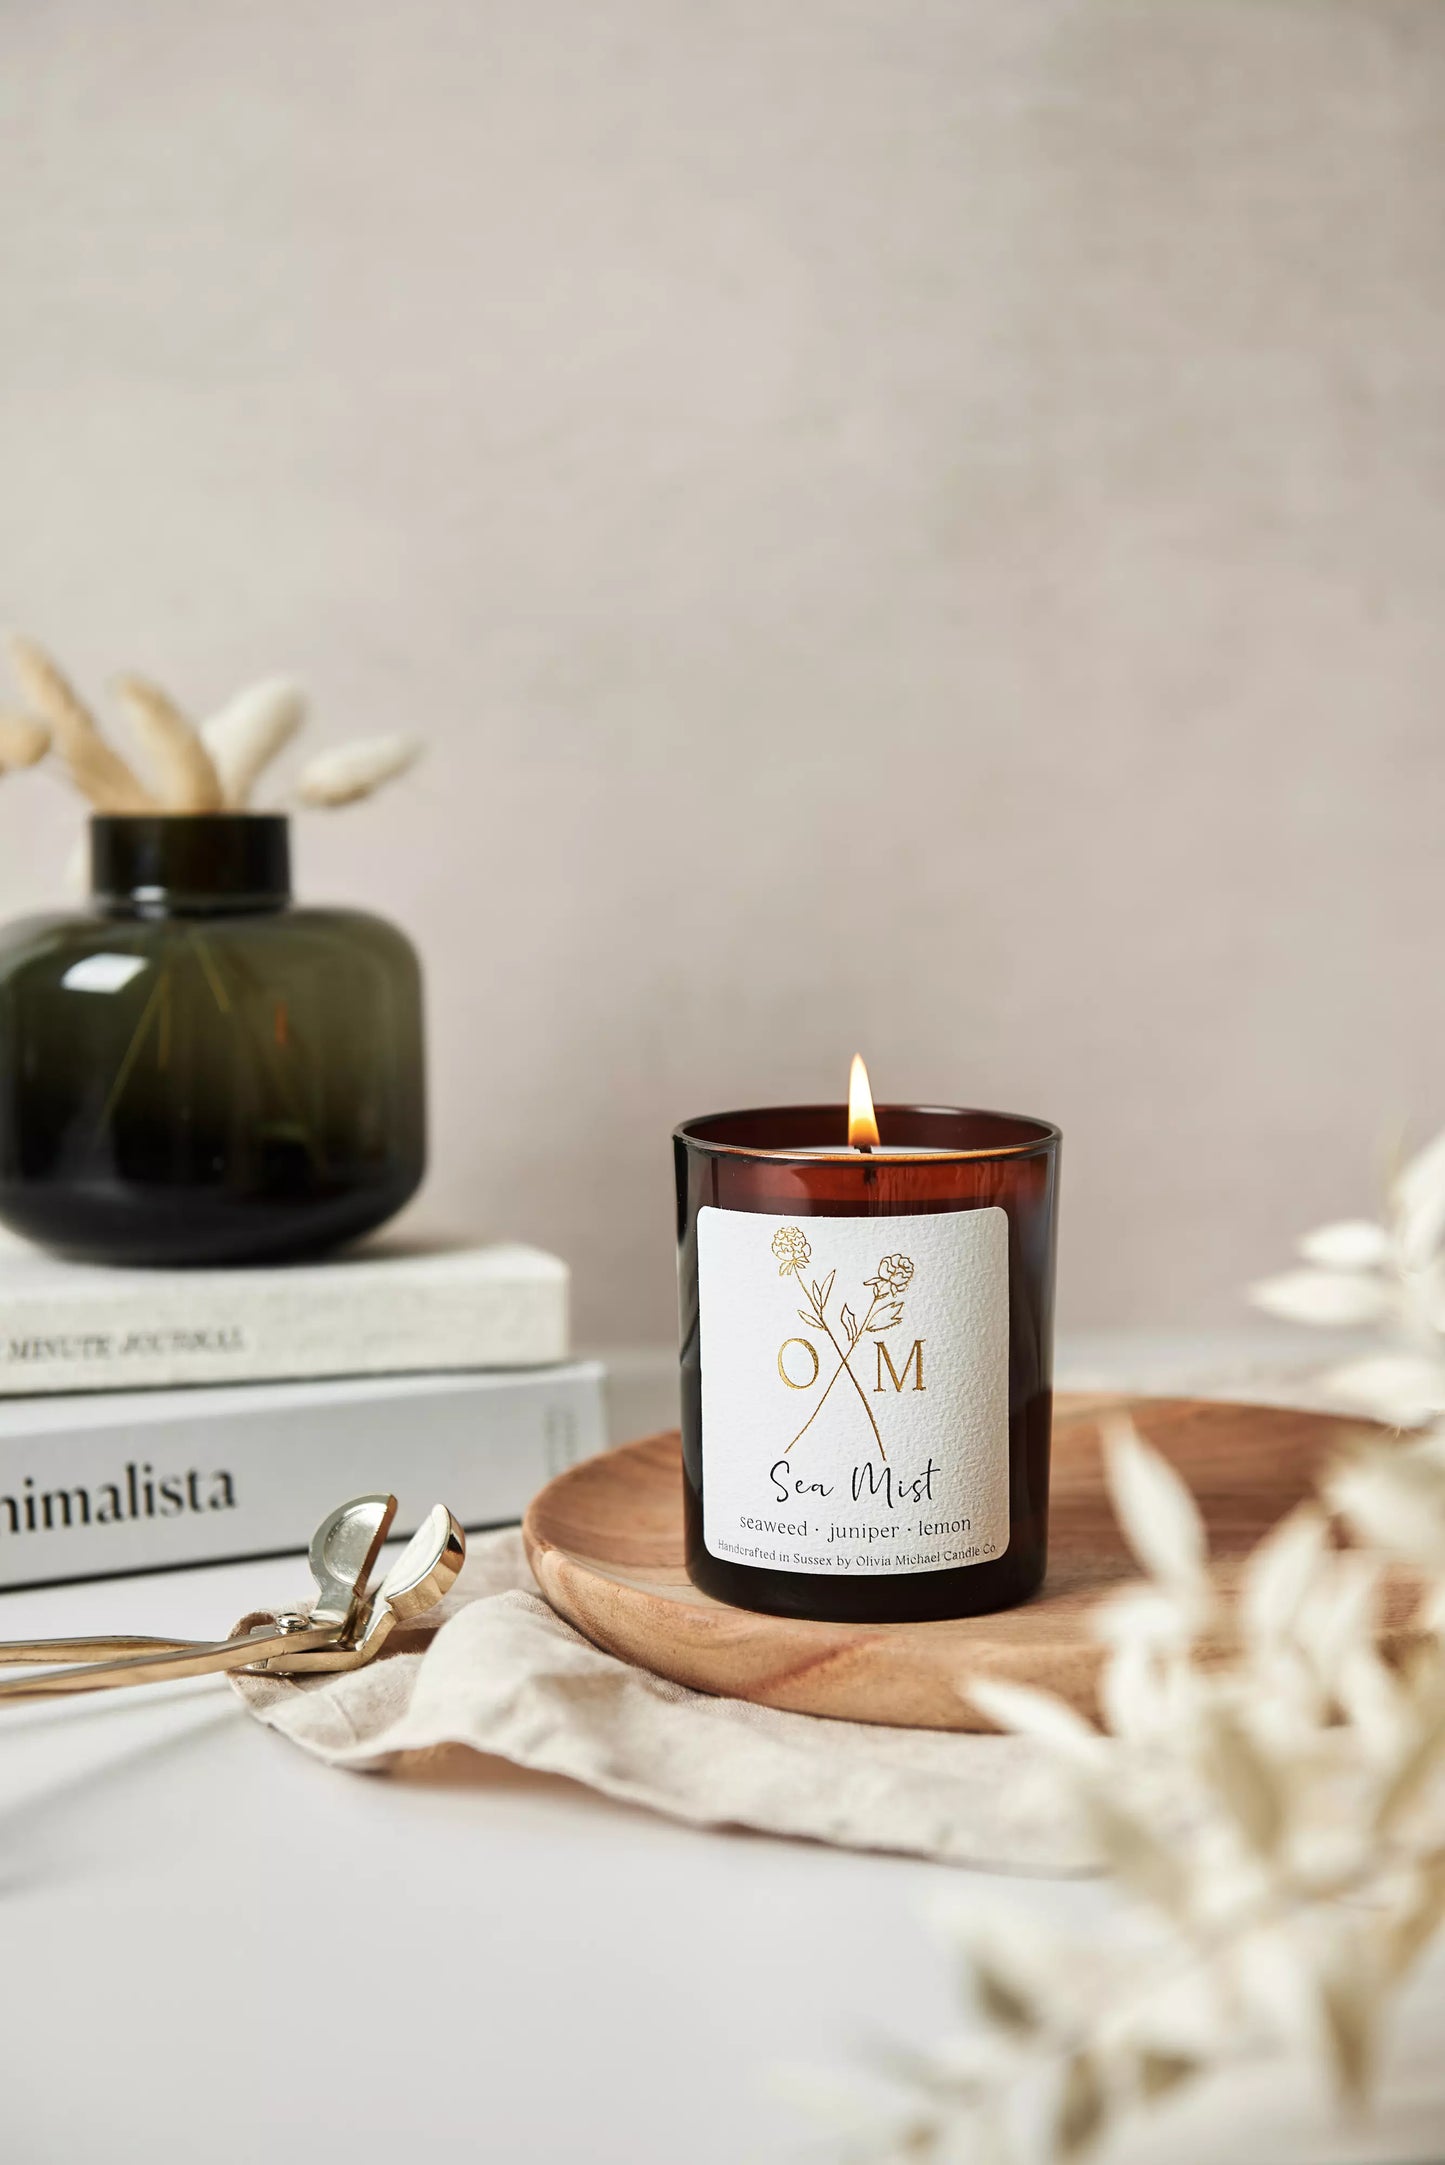 Our seaweed and juniper scented candle is lit and on display in an amber glass jar.